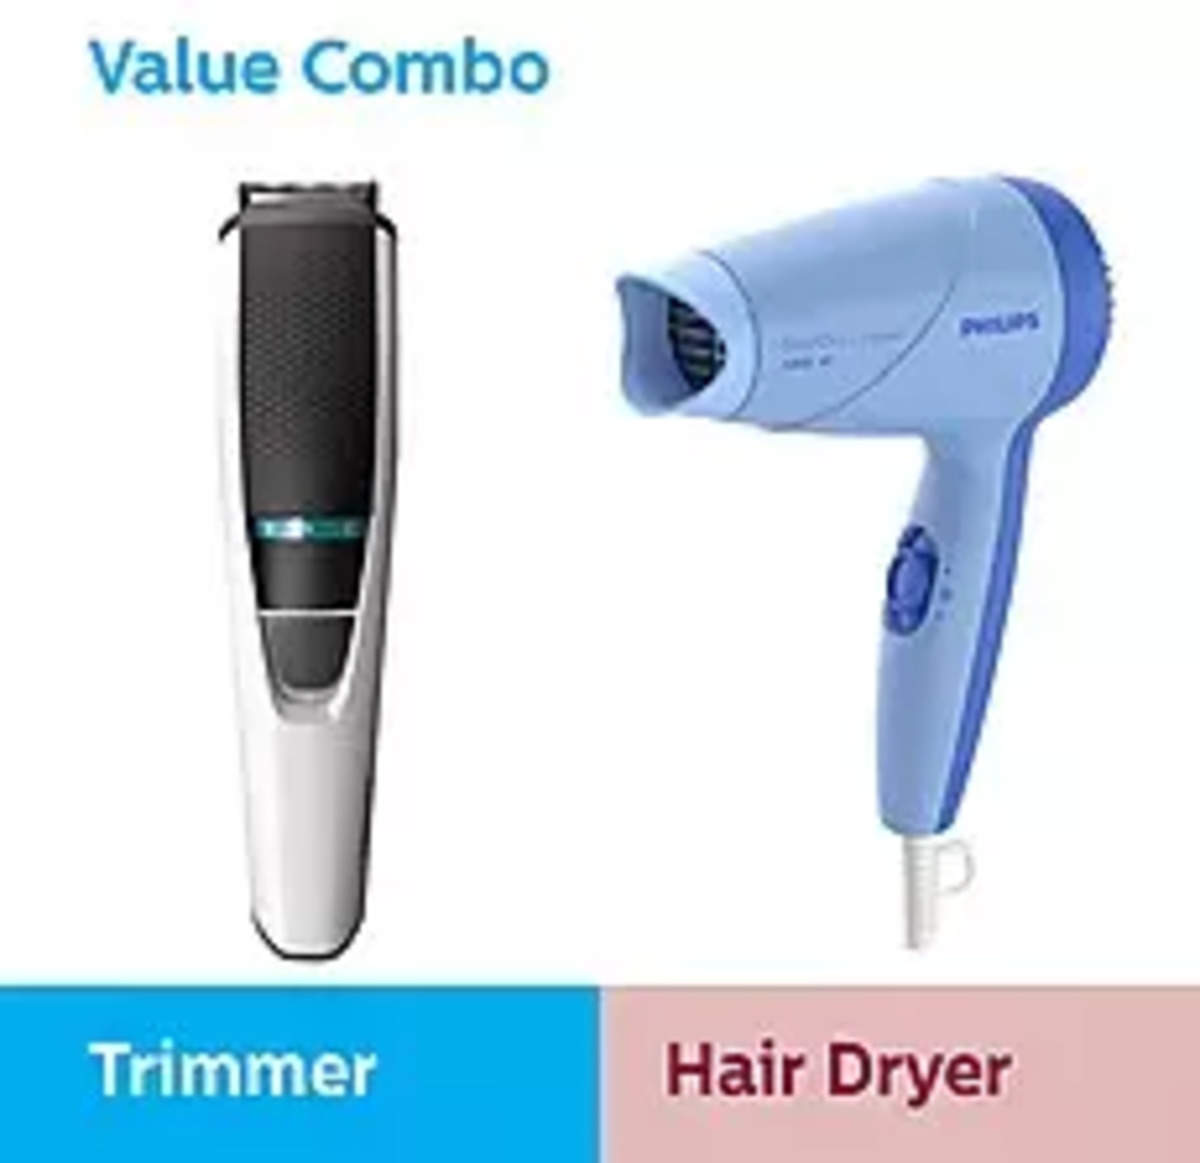 Philips Men's grooming combo - Trimmer (Durapower) & Hair dryer Price in  India, Specifications and Review